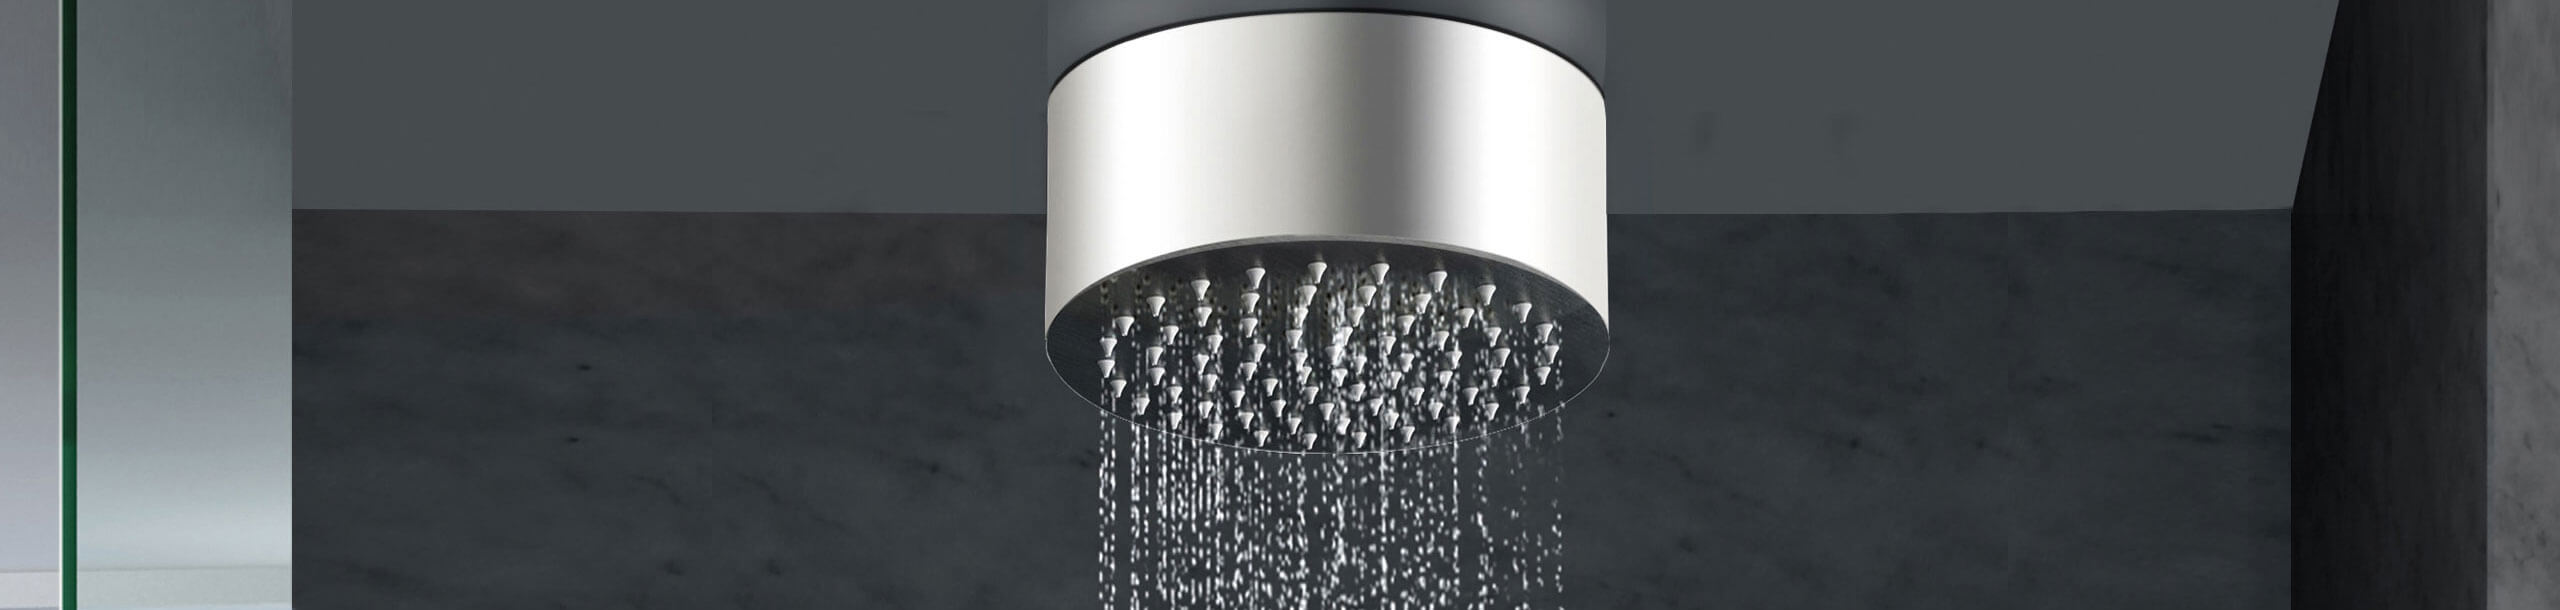 Fixed Shower Heads